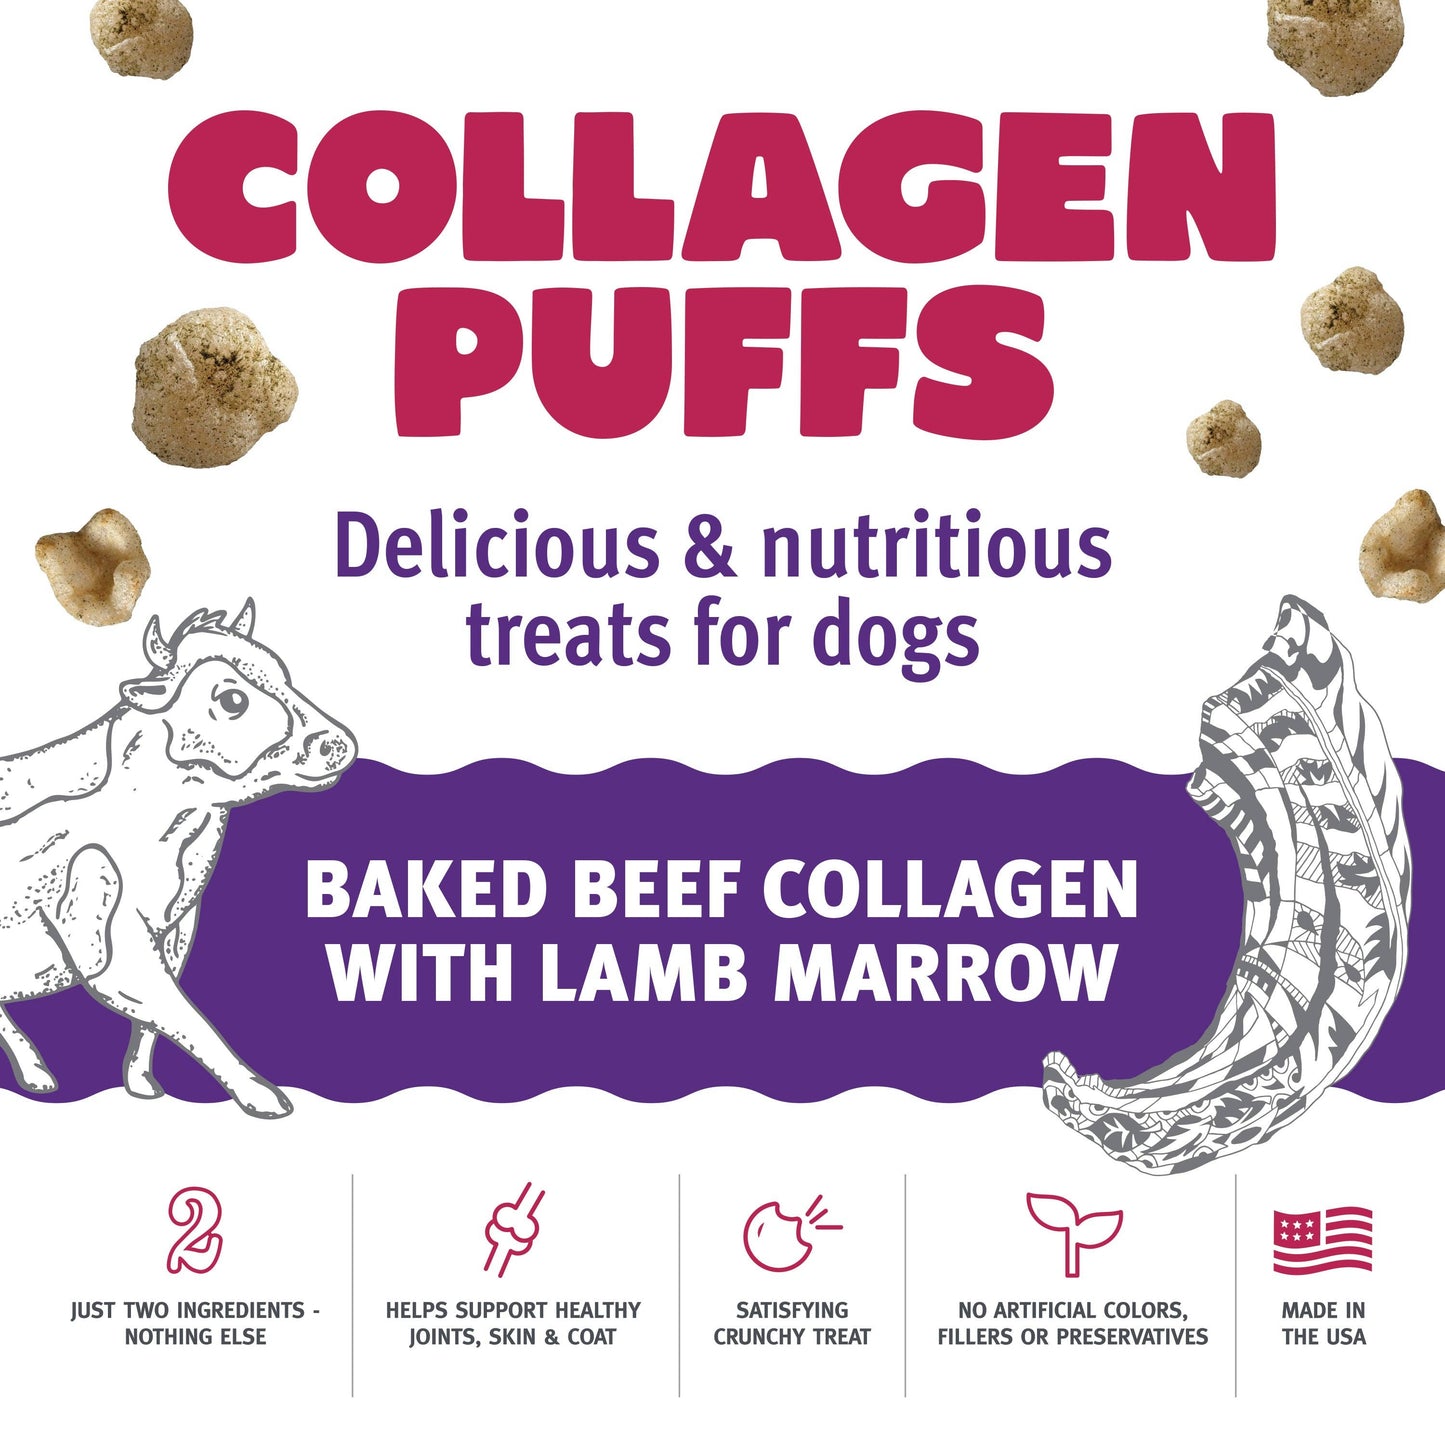 Icelandic+ Beef Collagen Puffs with Marrow Small Dogs 1.3-oz: 1.3-oz Bag